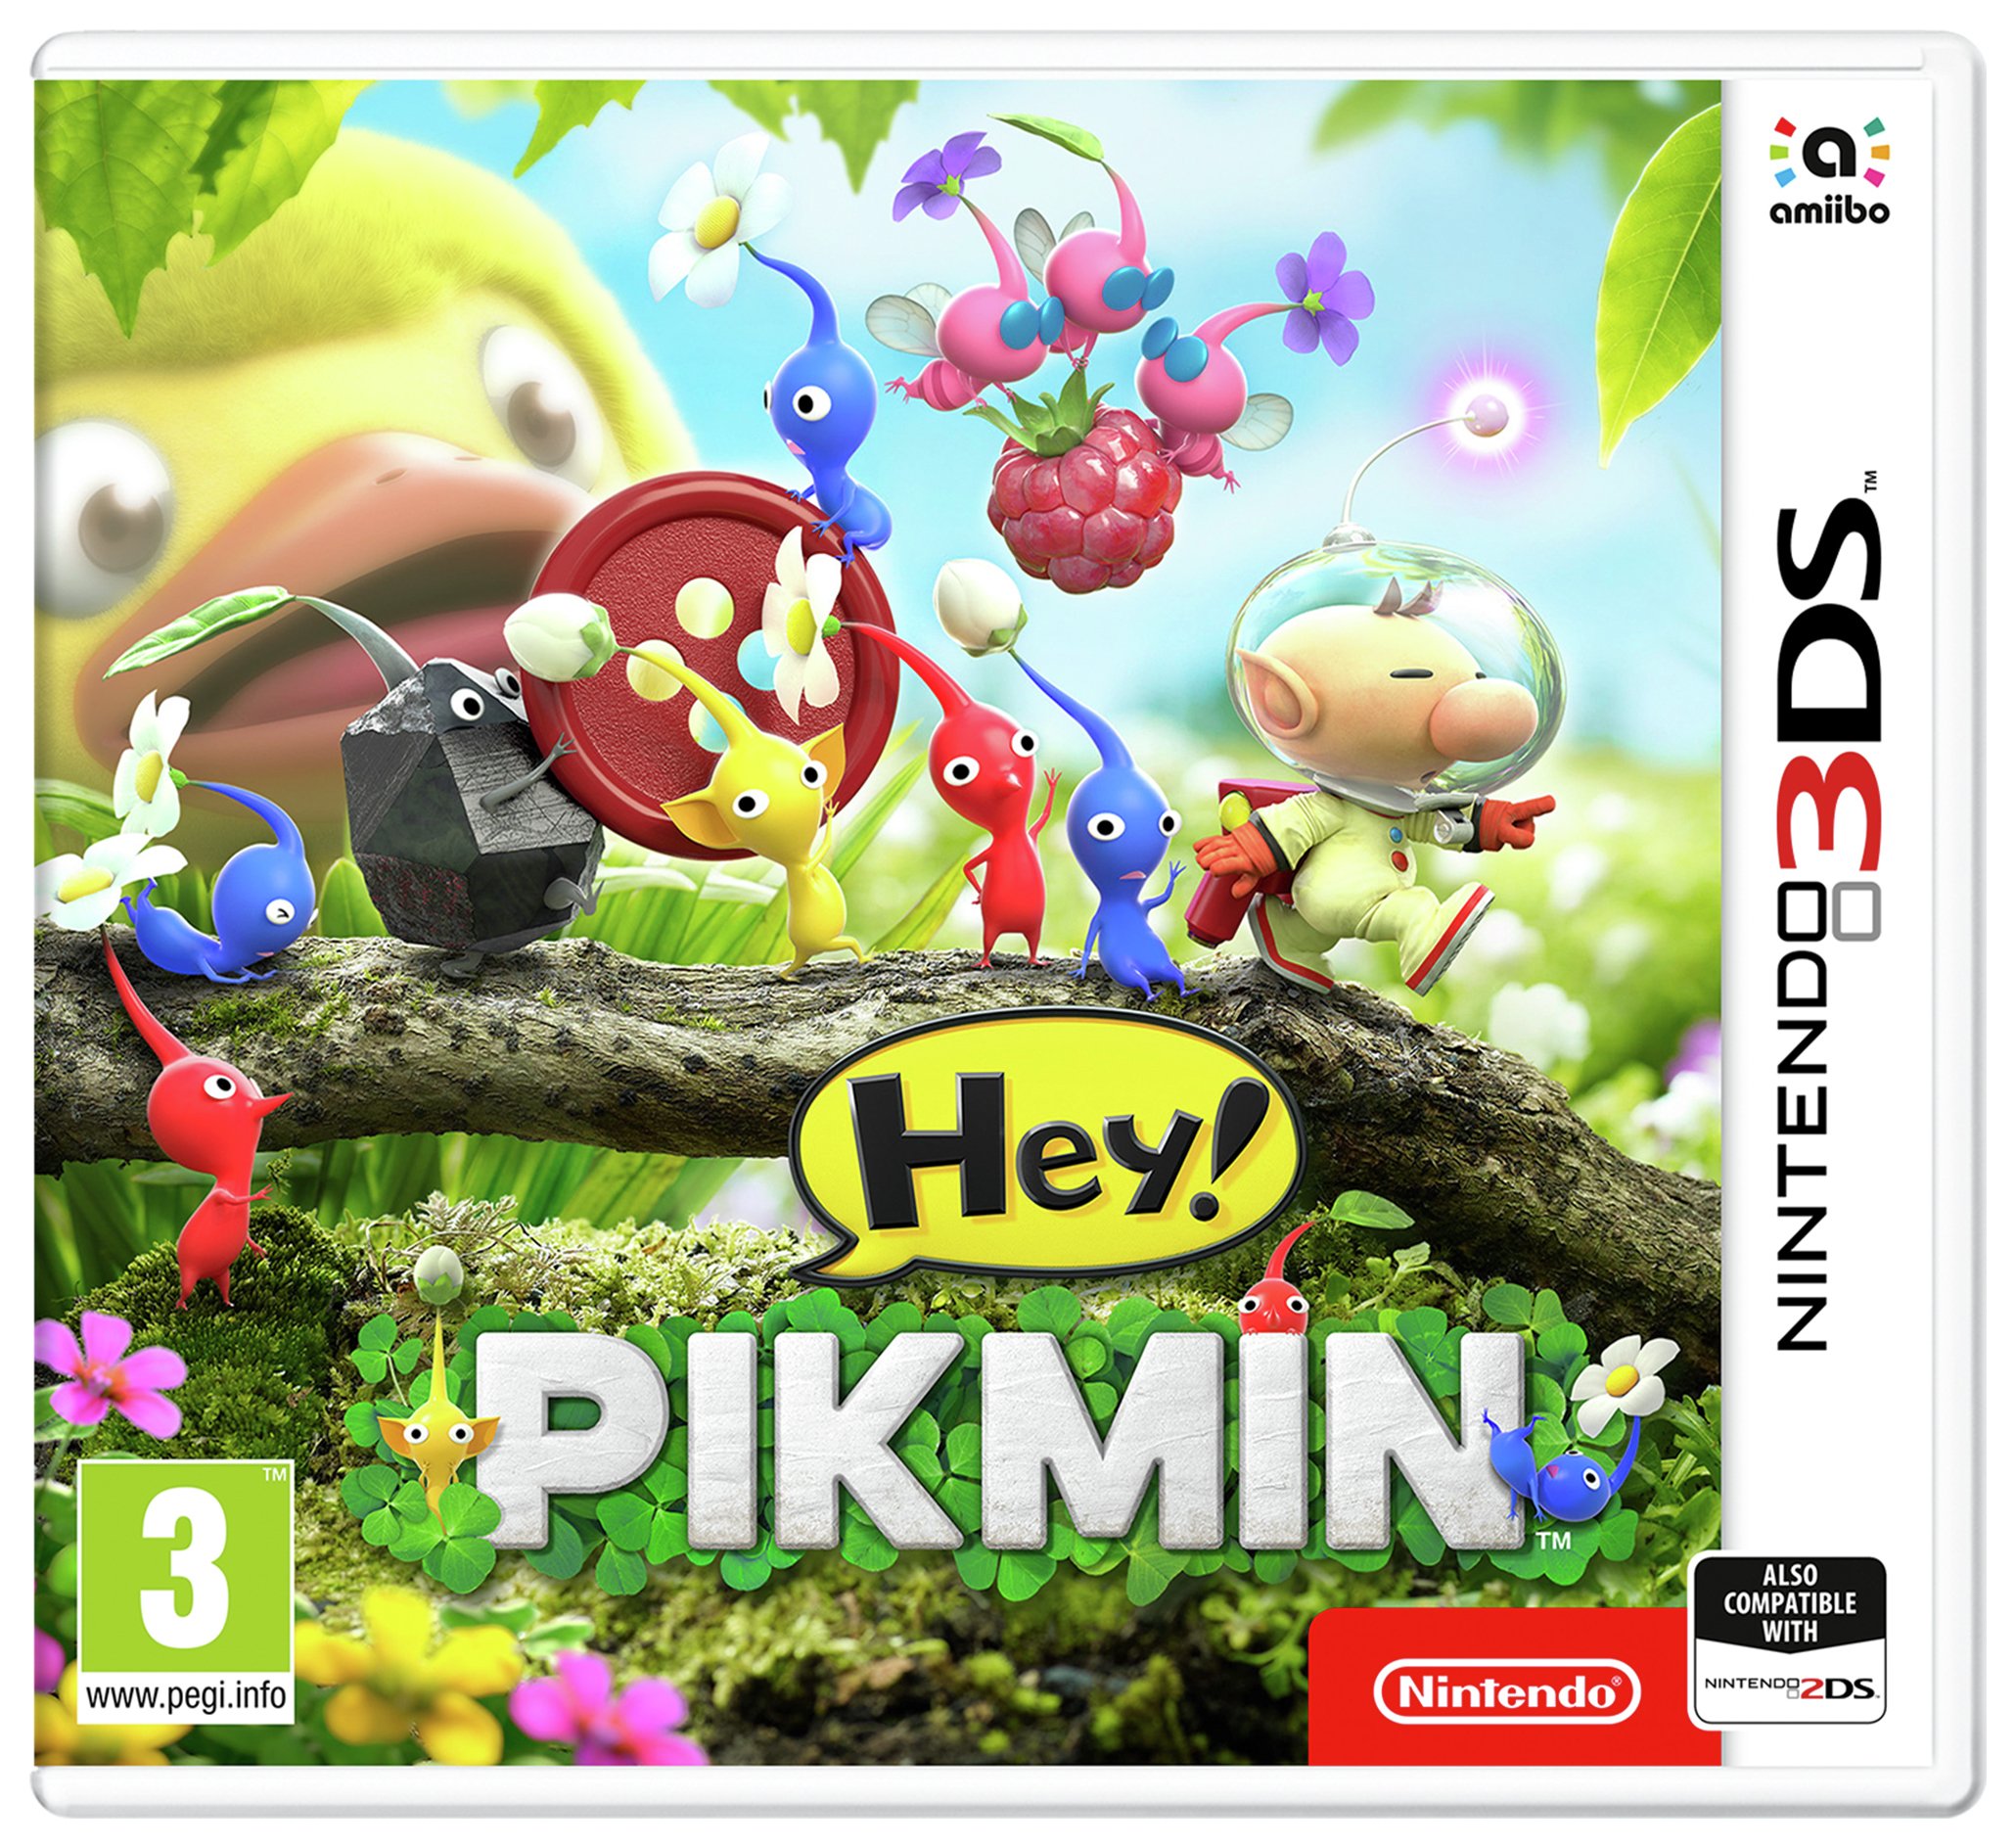 Hey! Pikmin Nintendo 3DS Game